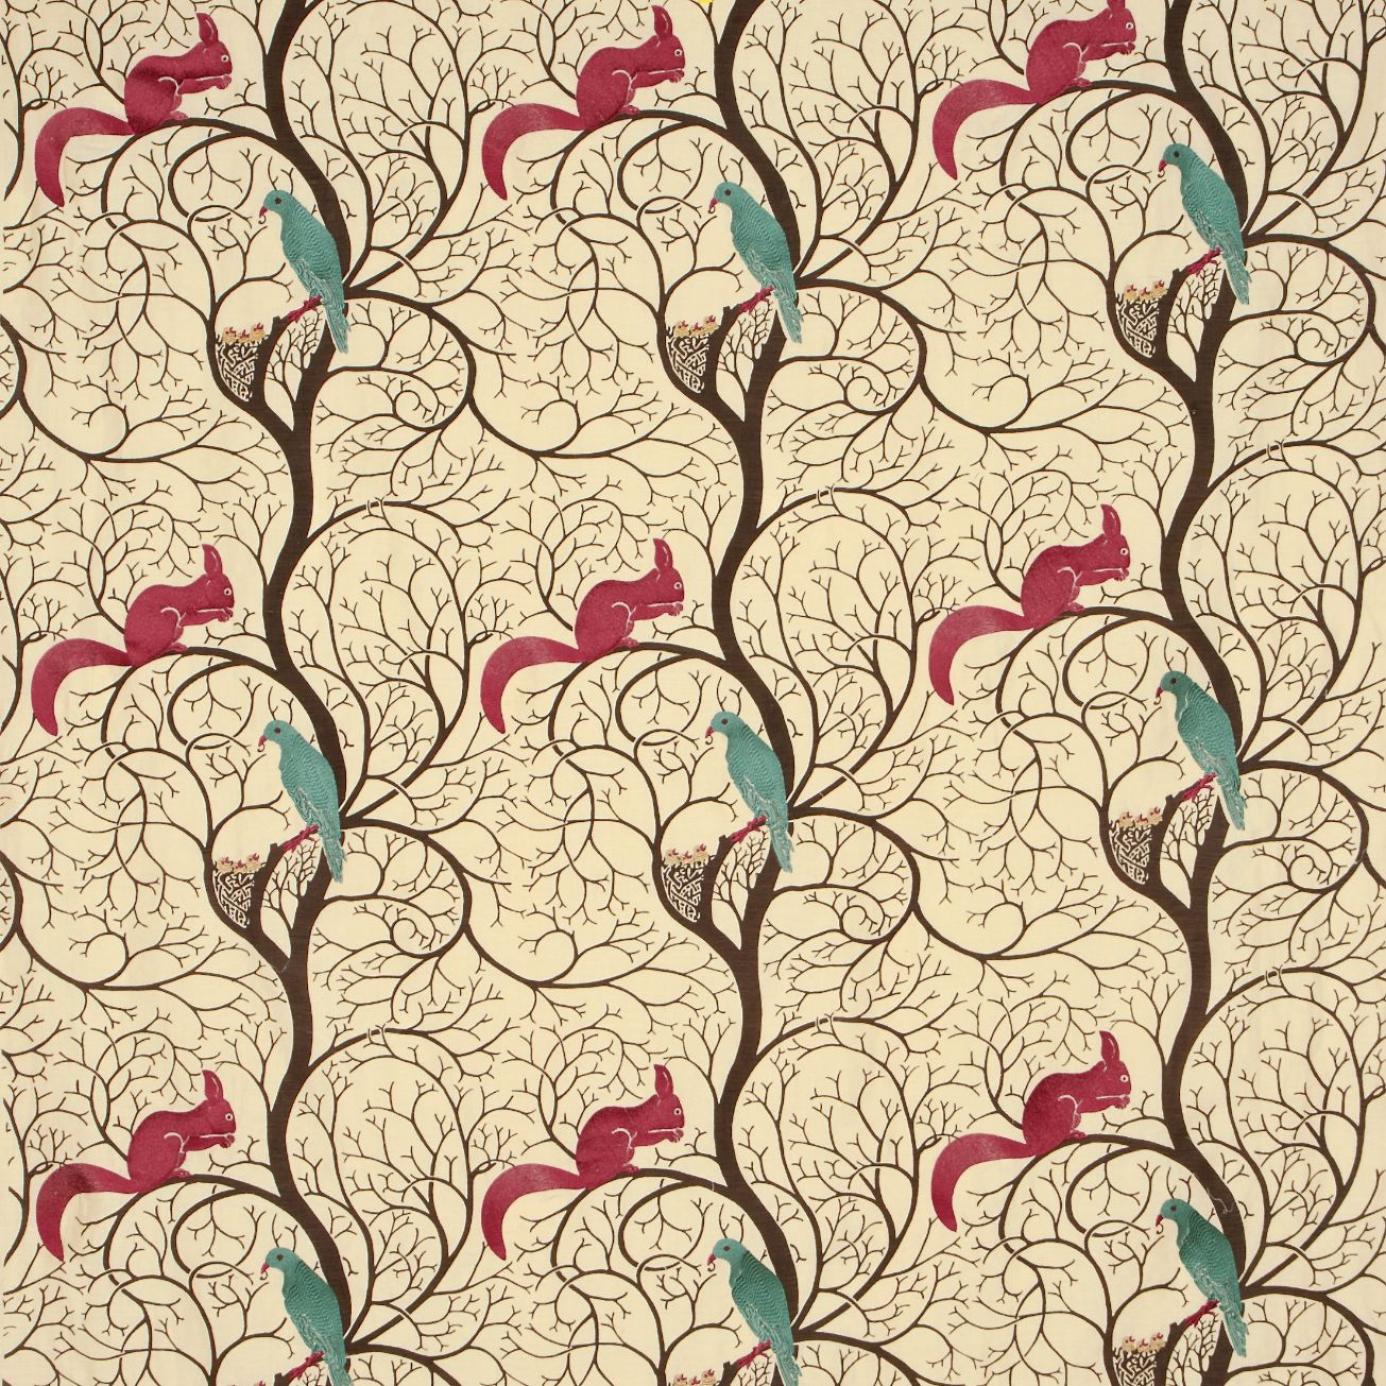 Sanderson Vintage Fabrics Squirrel Dove Embroidery Fabric   TealRed 1386x1386